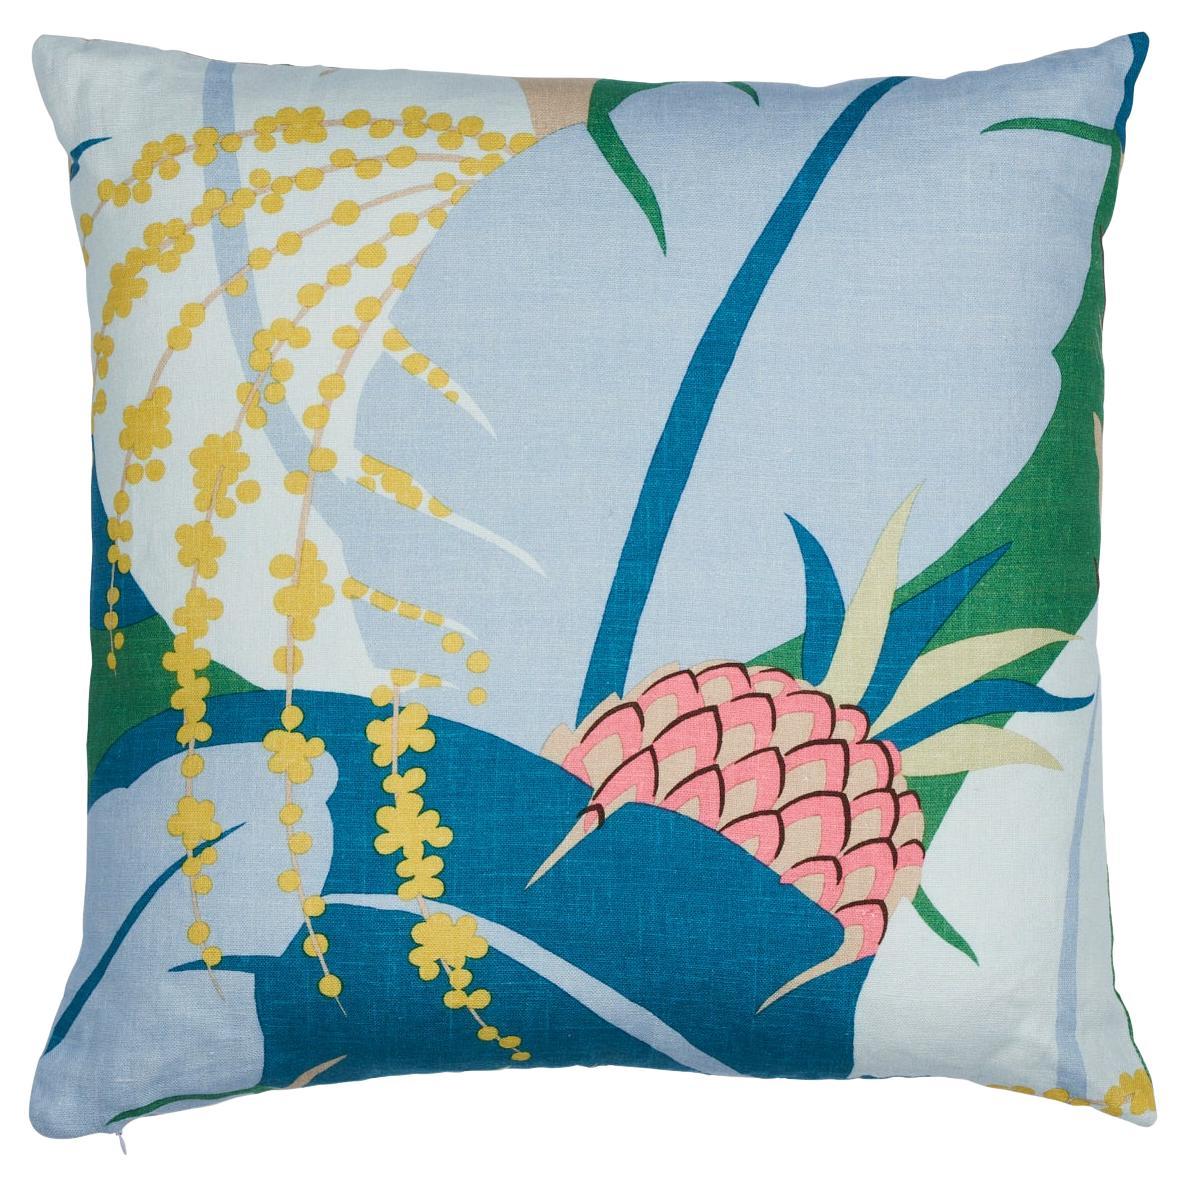 Shumacher Ananas 18" Pillow in Peacock For Sale